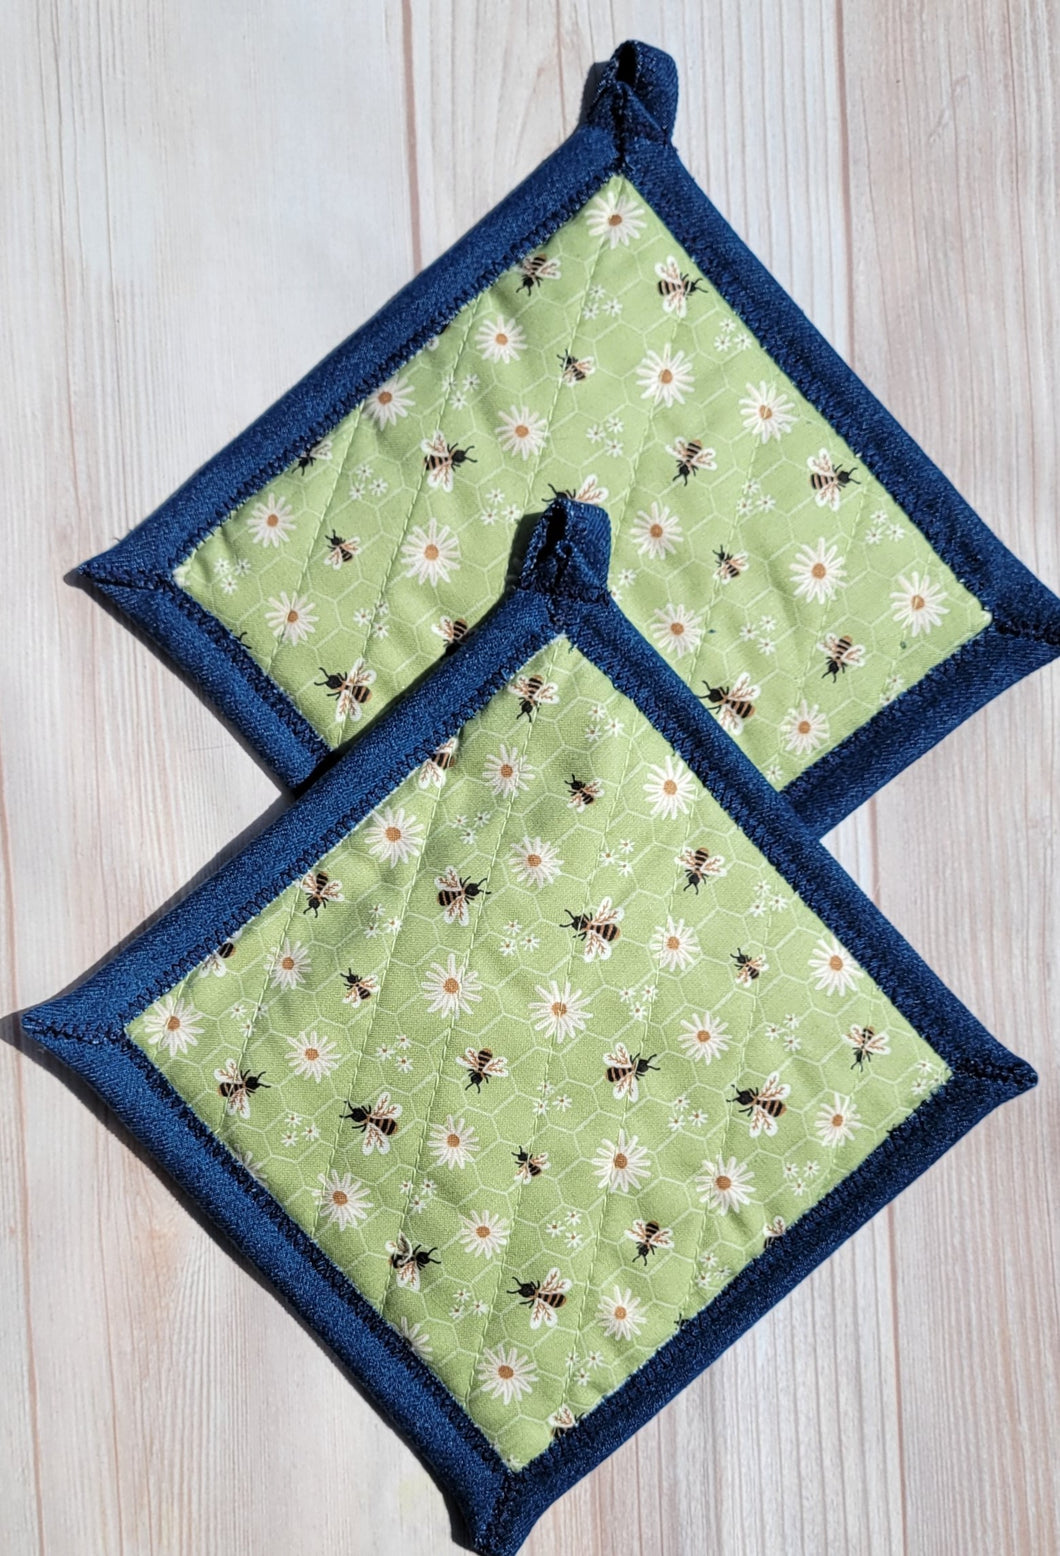 Pot Holders - Green Bees